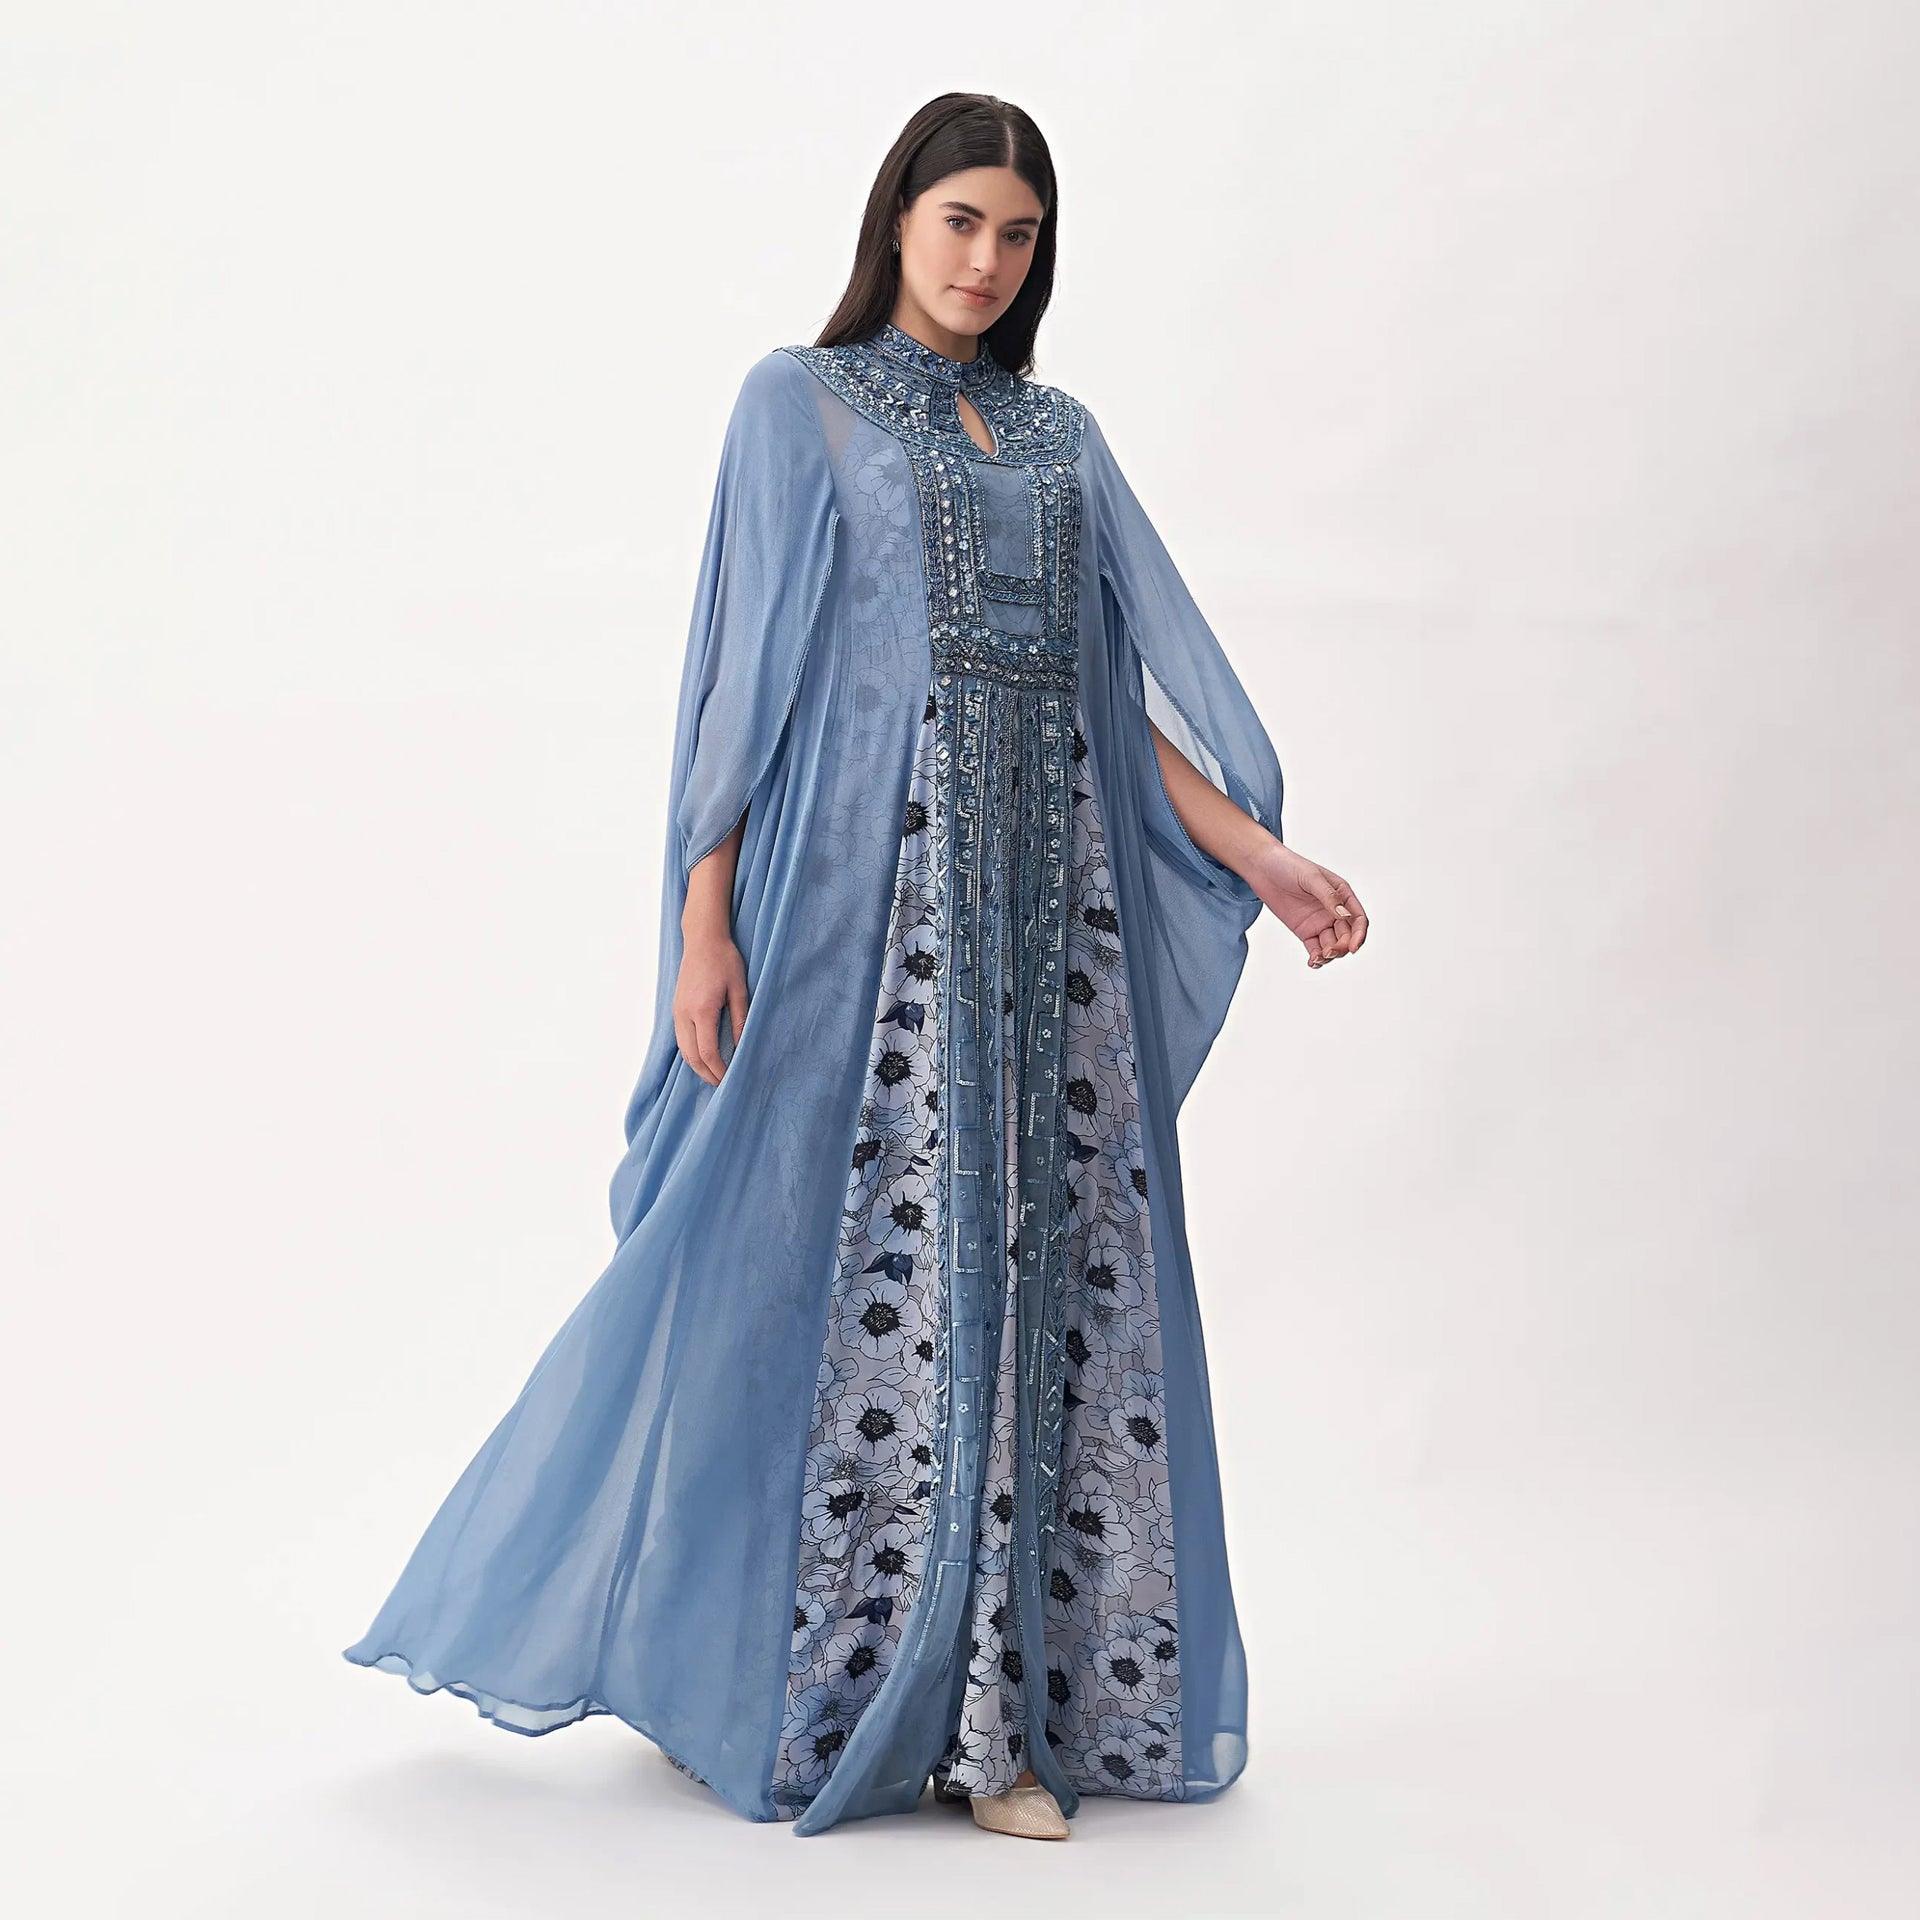 Light Blue Adele Dress with Silver Embroidery and Cape From Shalky - WECRE8